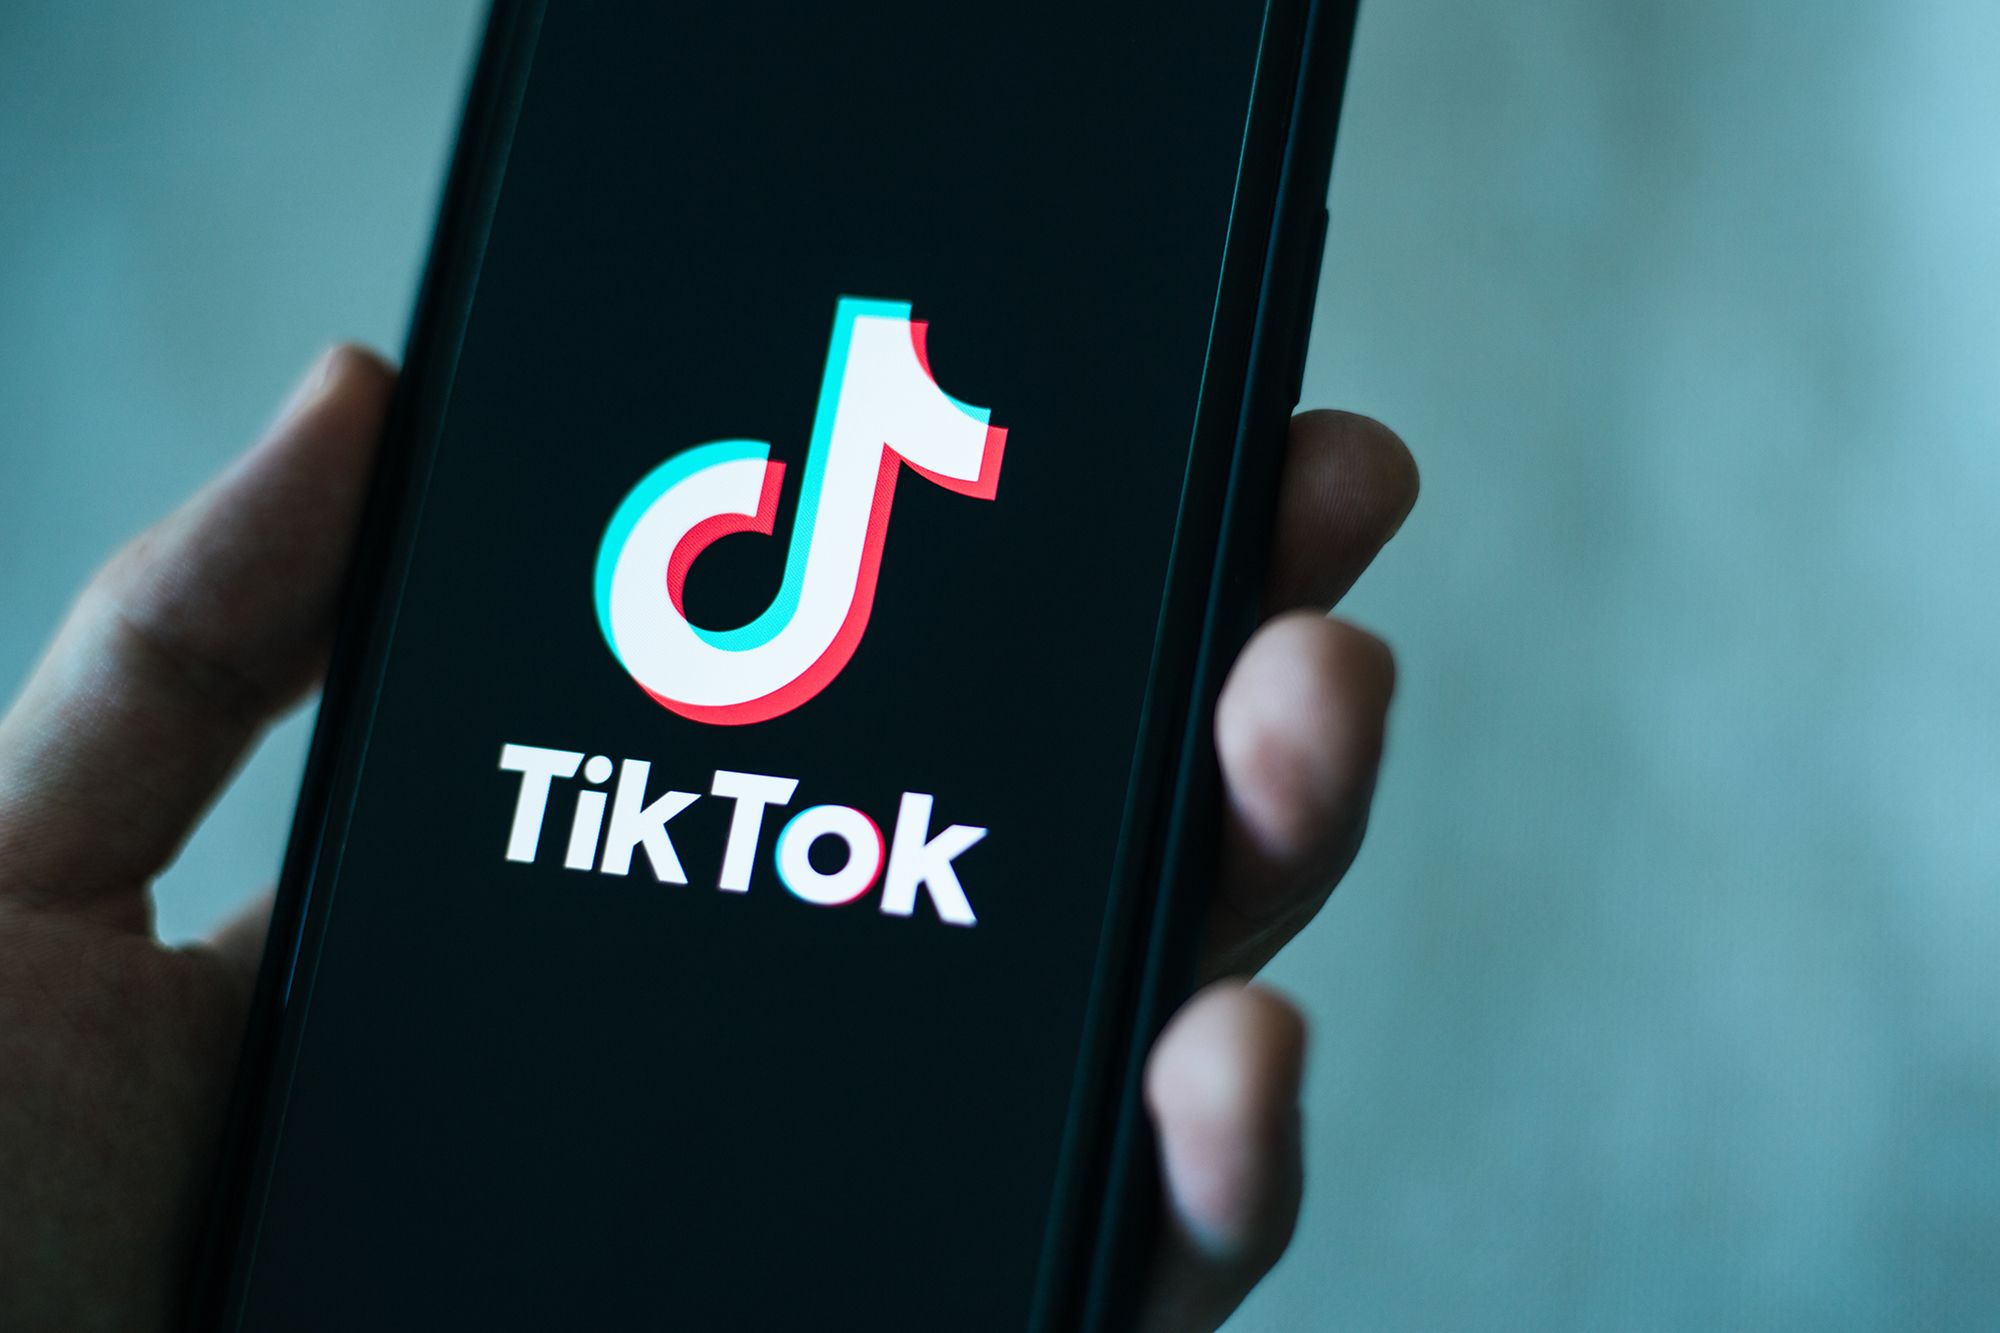 Agencies have 30 days to ban TikTok on government devices, White House says